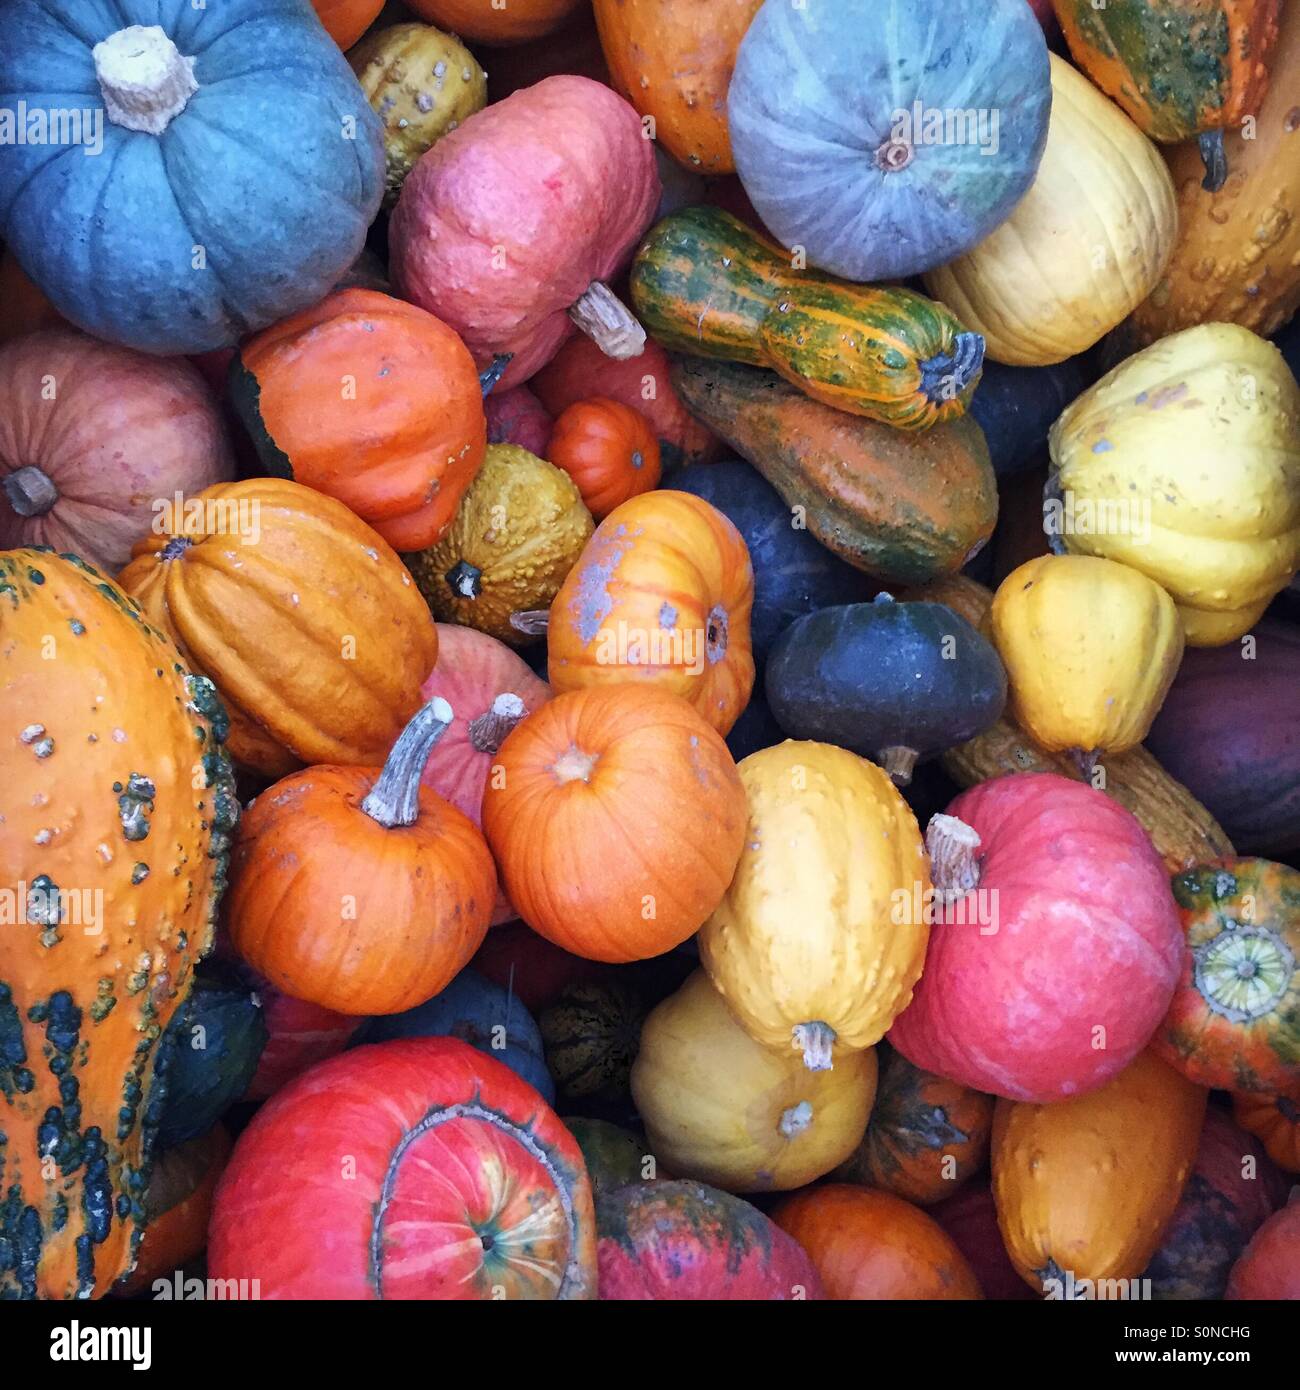 Simply gourd-geous! Stock Photo